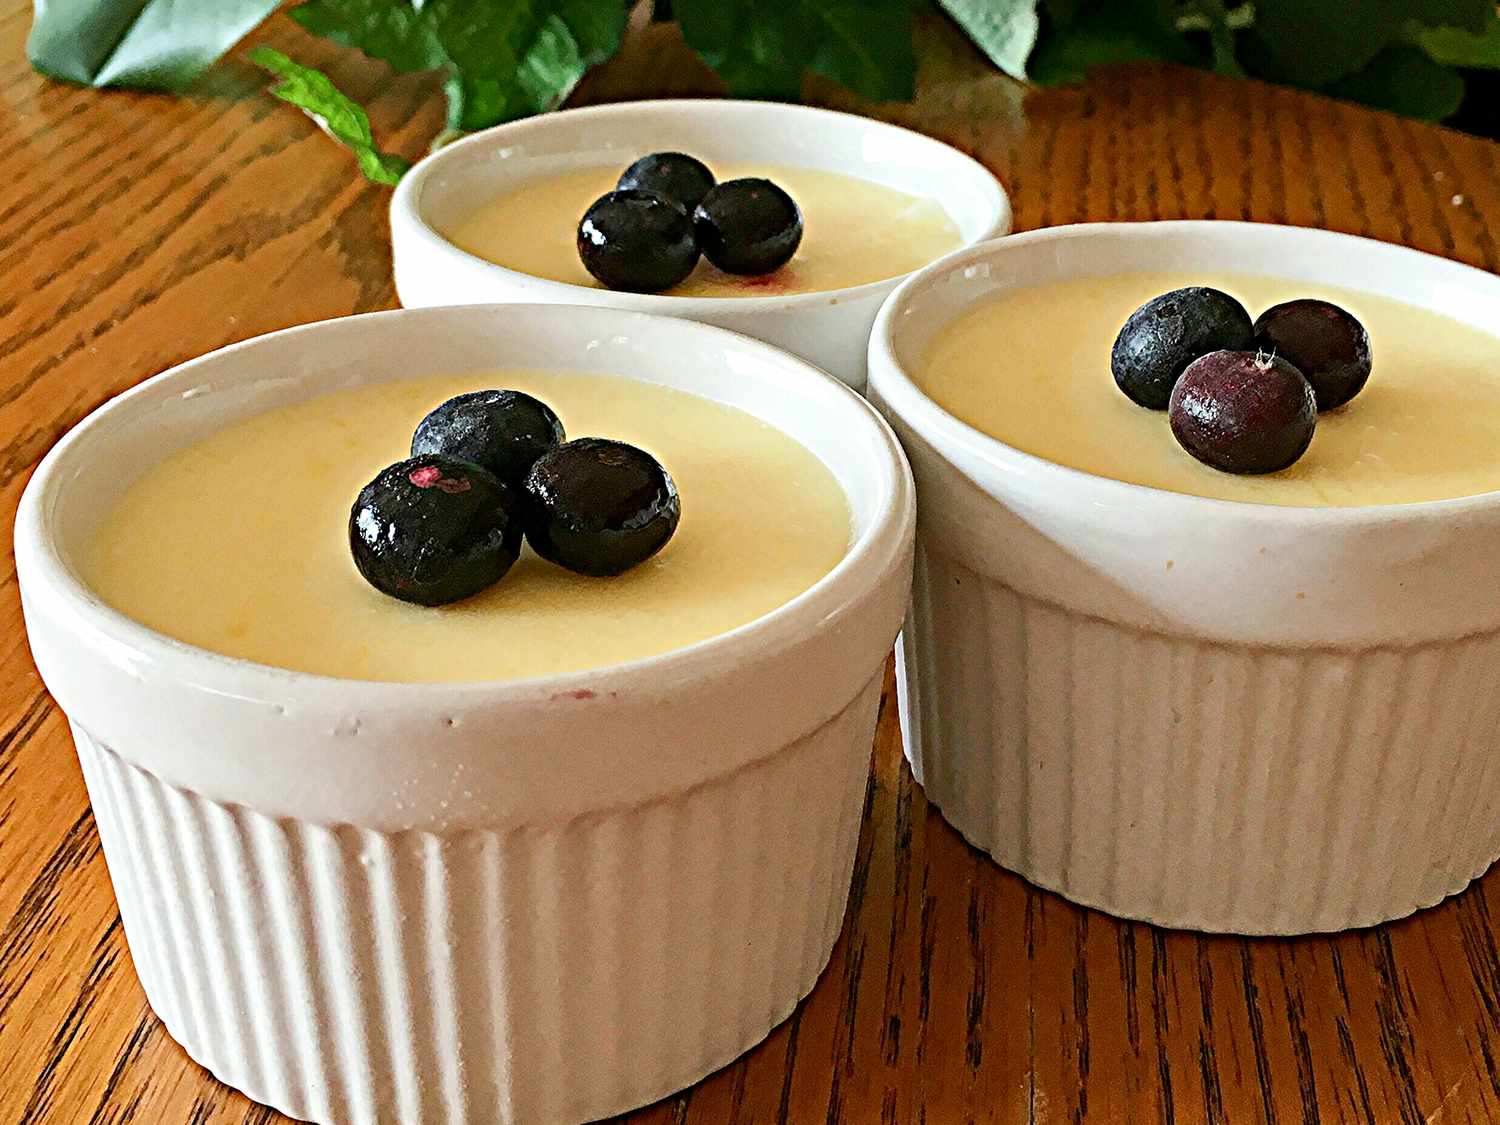 Close up view of Mango Pudding garnished with blueberries in white ramekins